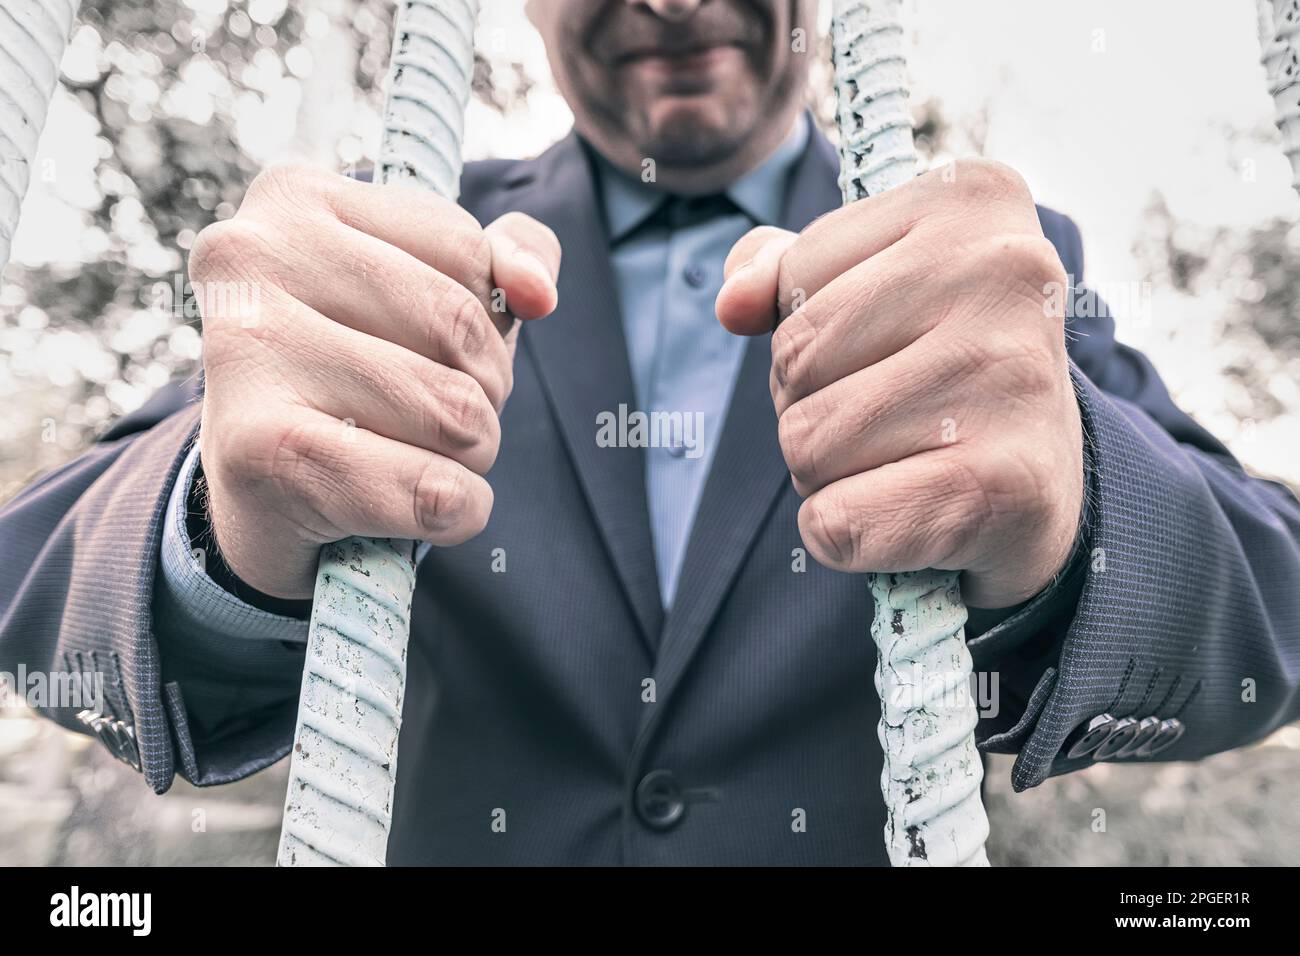 Hands of a young adult businessman through bars of a prison cell in a derelict building. concept of financial crimes Stock Photo